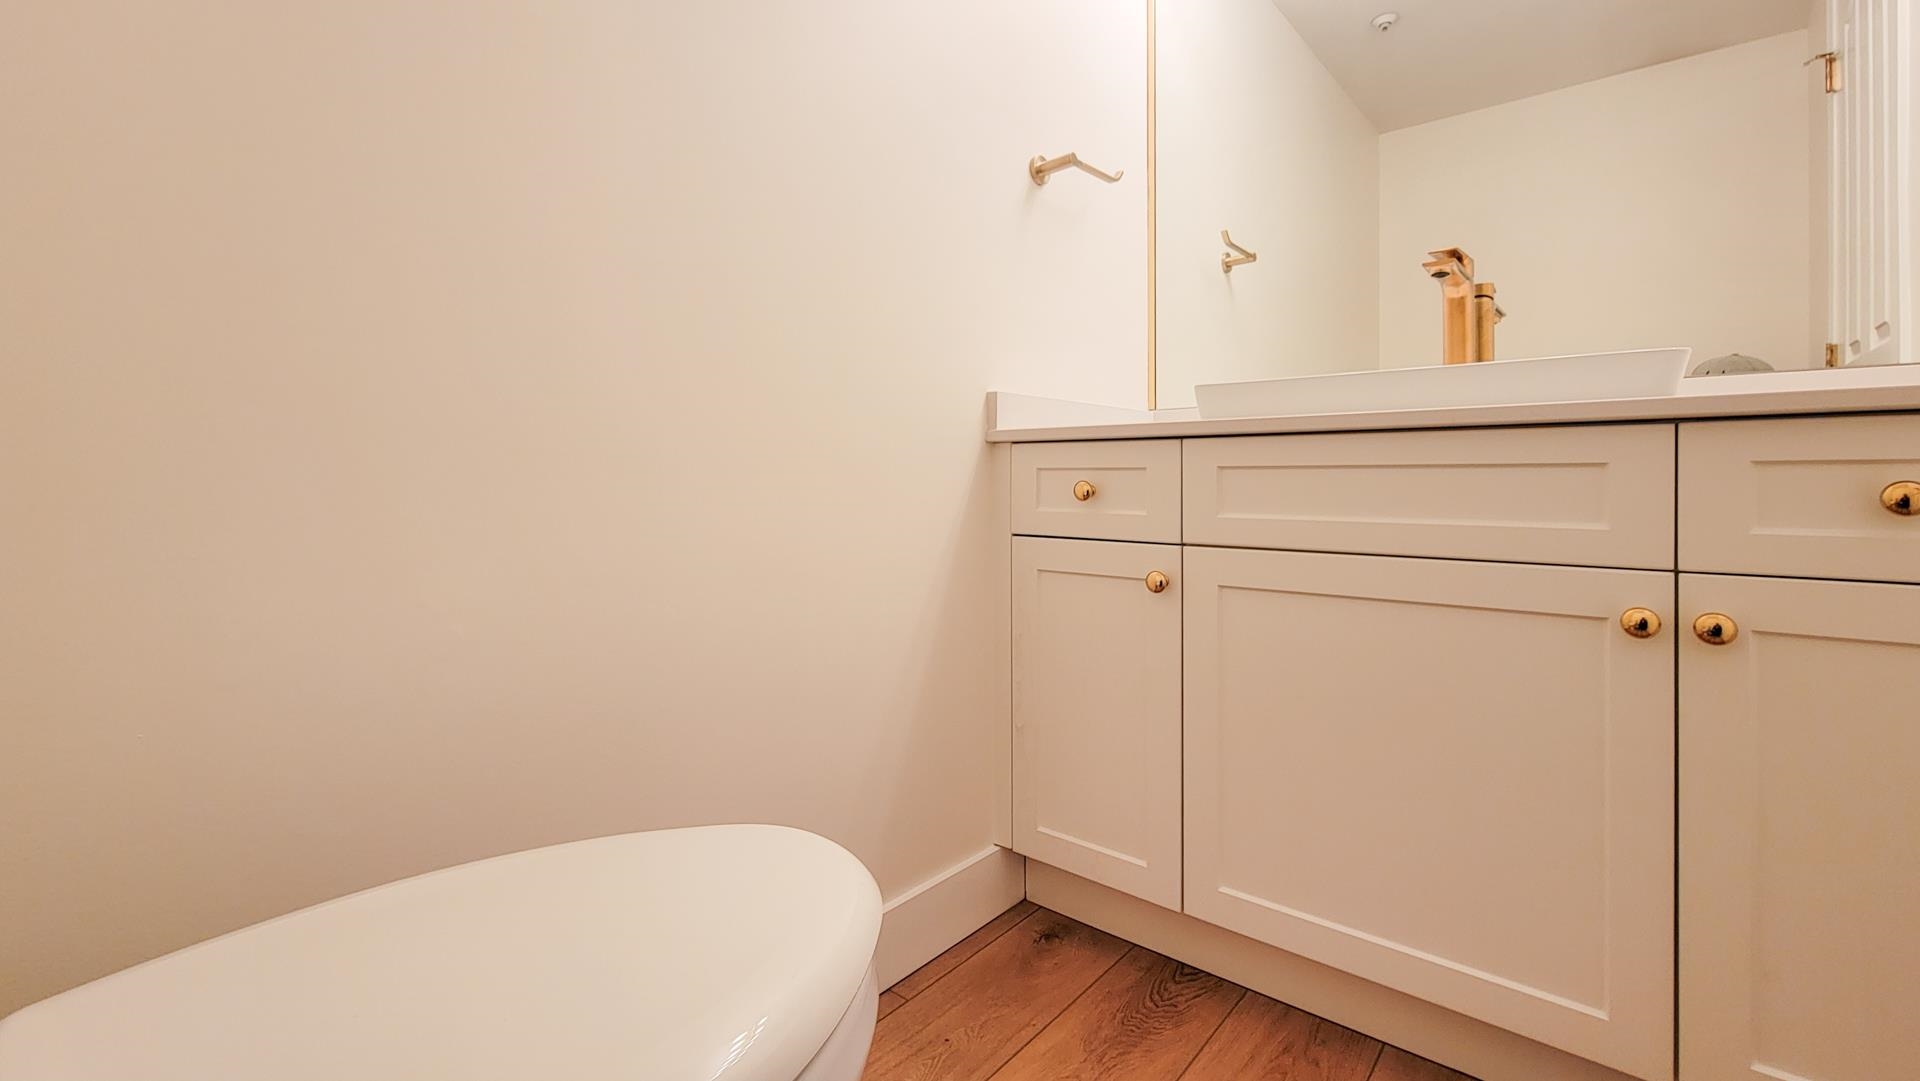 The powder room is located off of the foyer and is discretely tucked away.  The new cabinetry, sink toilet and gold fixtures are consistent with the primary bathroom